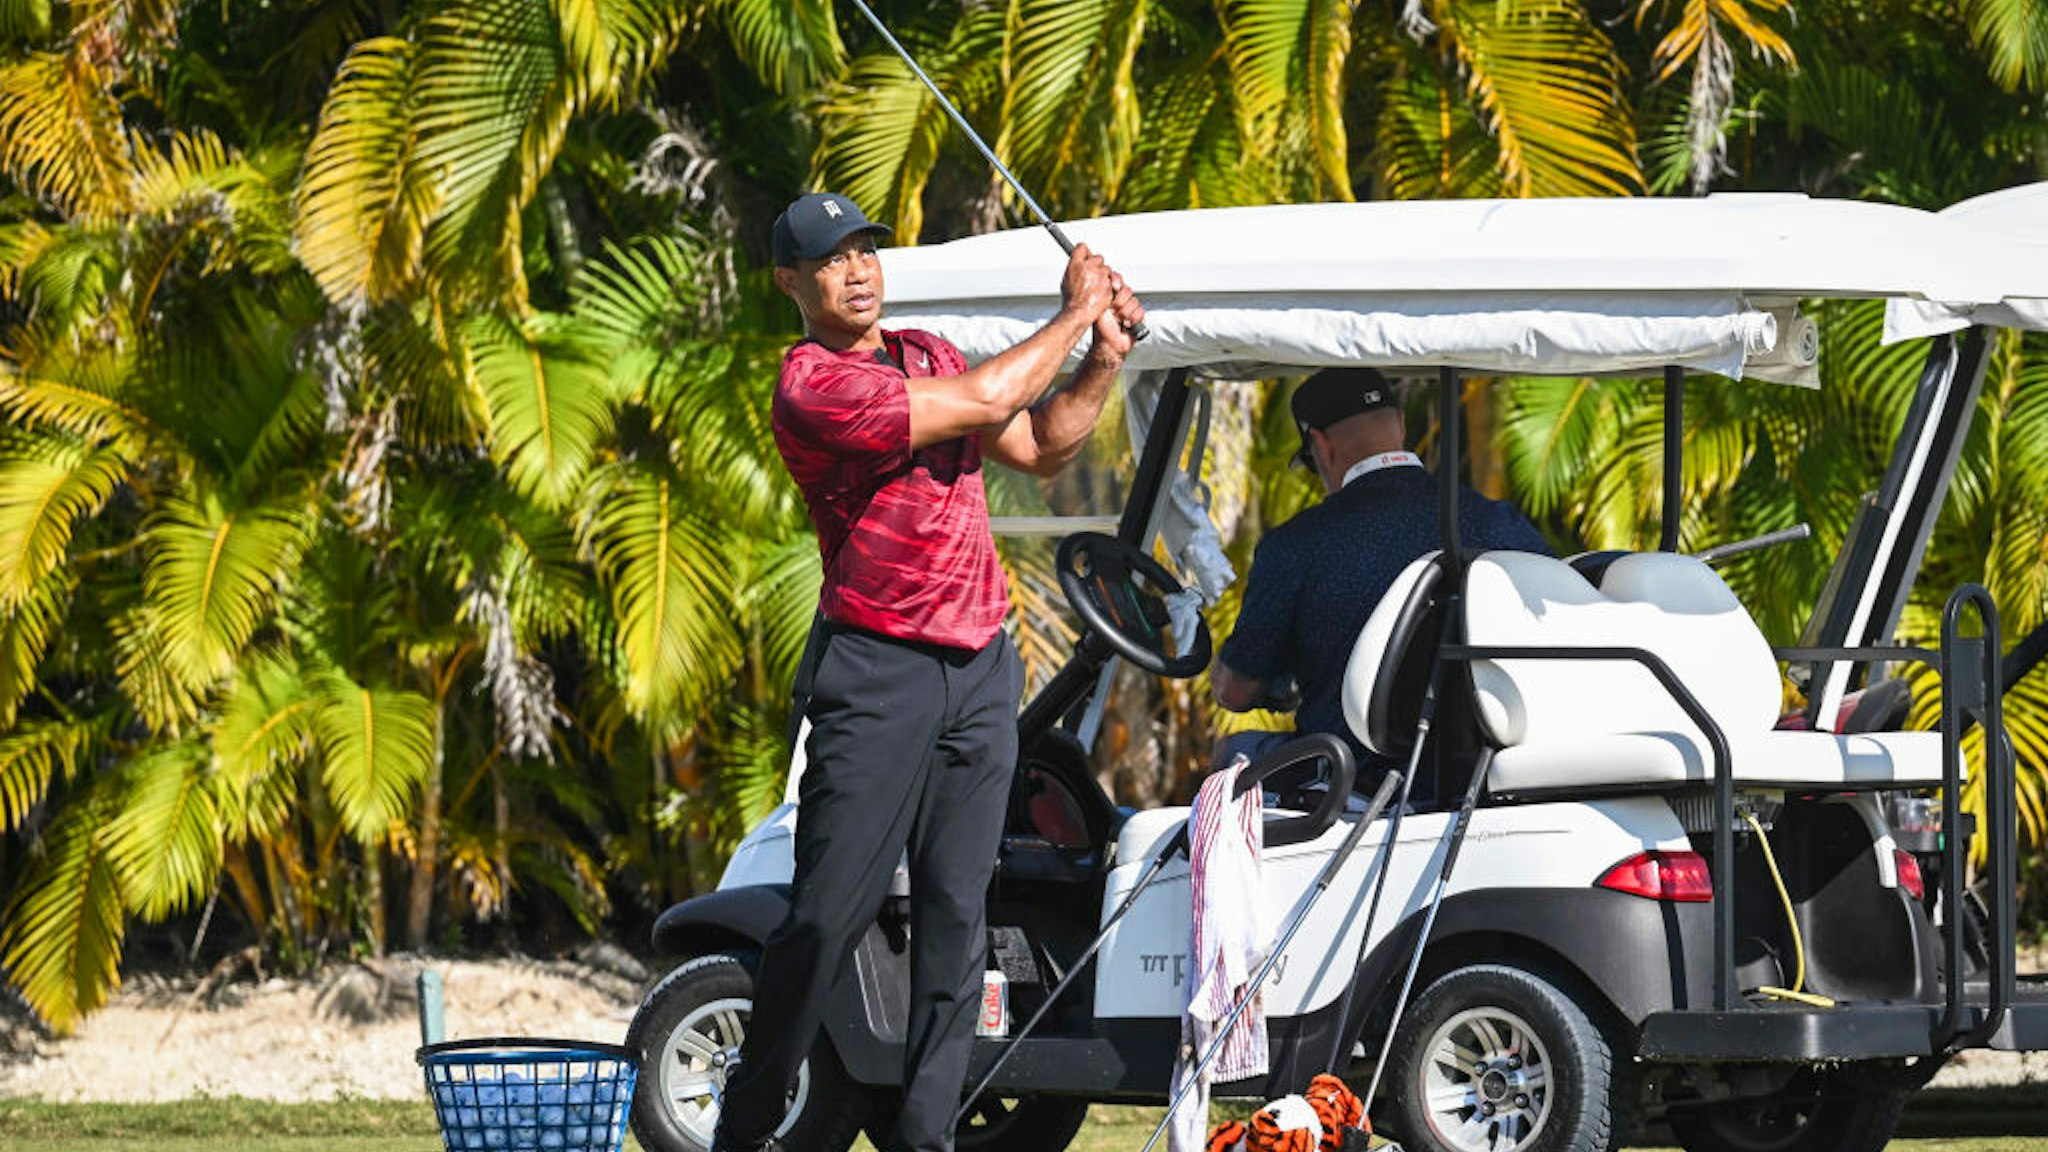 NASSAU, BAHAMAS - DECEMBER 05: Tournament host Tiger Woods hits wedges on the practice range during the final round of the Hero World Challenge at Albany on December 5, 2021, in Nassau, New Providence, Bahamas. (Photo by Keyur Khamar/PGA TOUR via Getty Images)